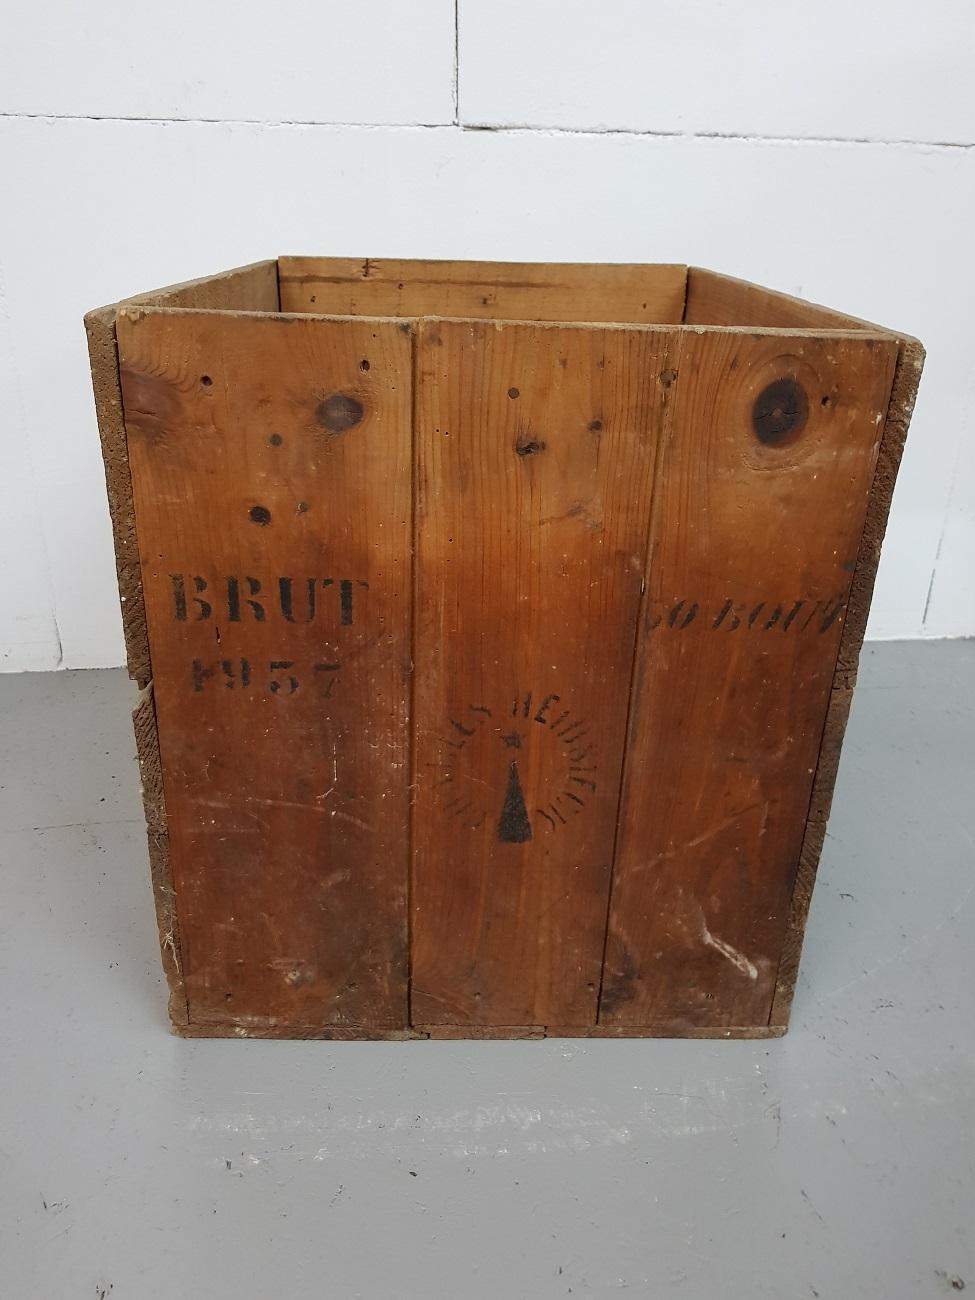 Beautiful Old Champagne crate for 50 bottles from the company Charles Heidsieck for export to Germany dated 1937 in the time of Nazi Germany.

The measurements are,
Depth 39 cm/ 15.3 inch.
Width 48 cm/ 18.8 inch.
Height 43 cm/ 16.9 inch.
     